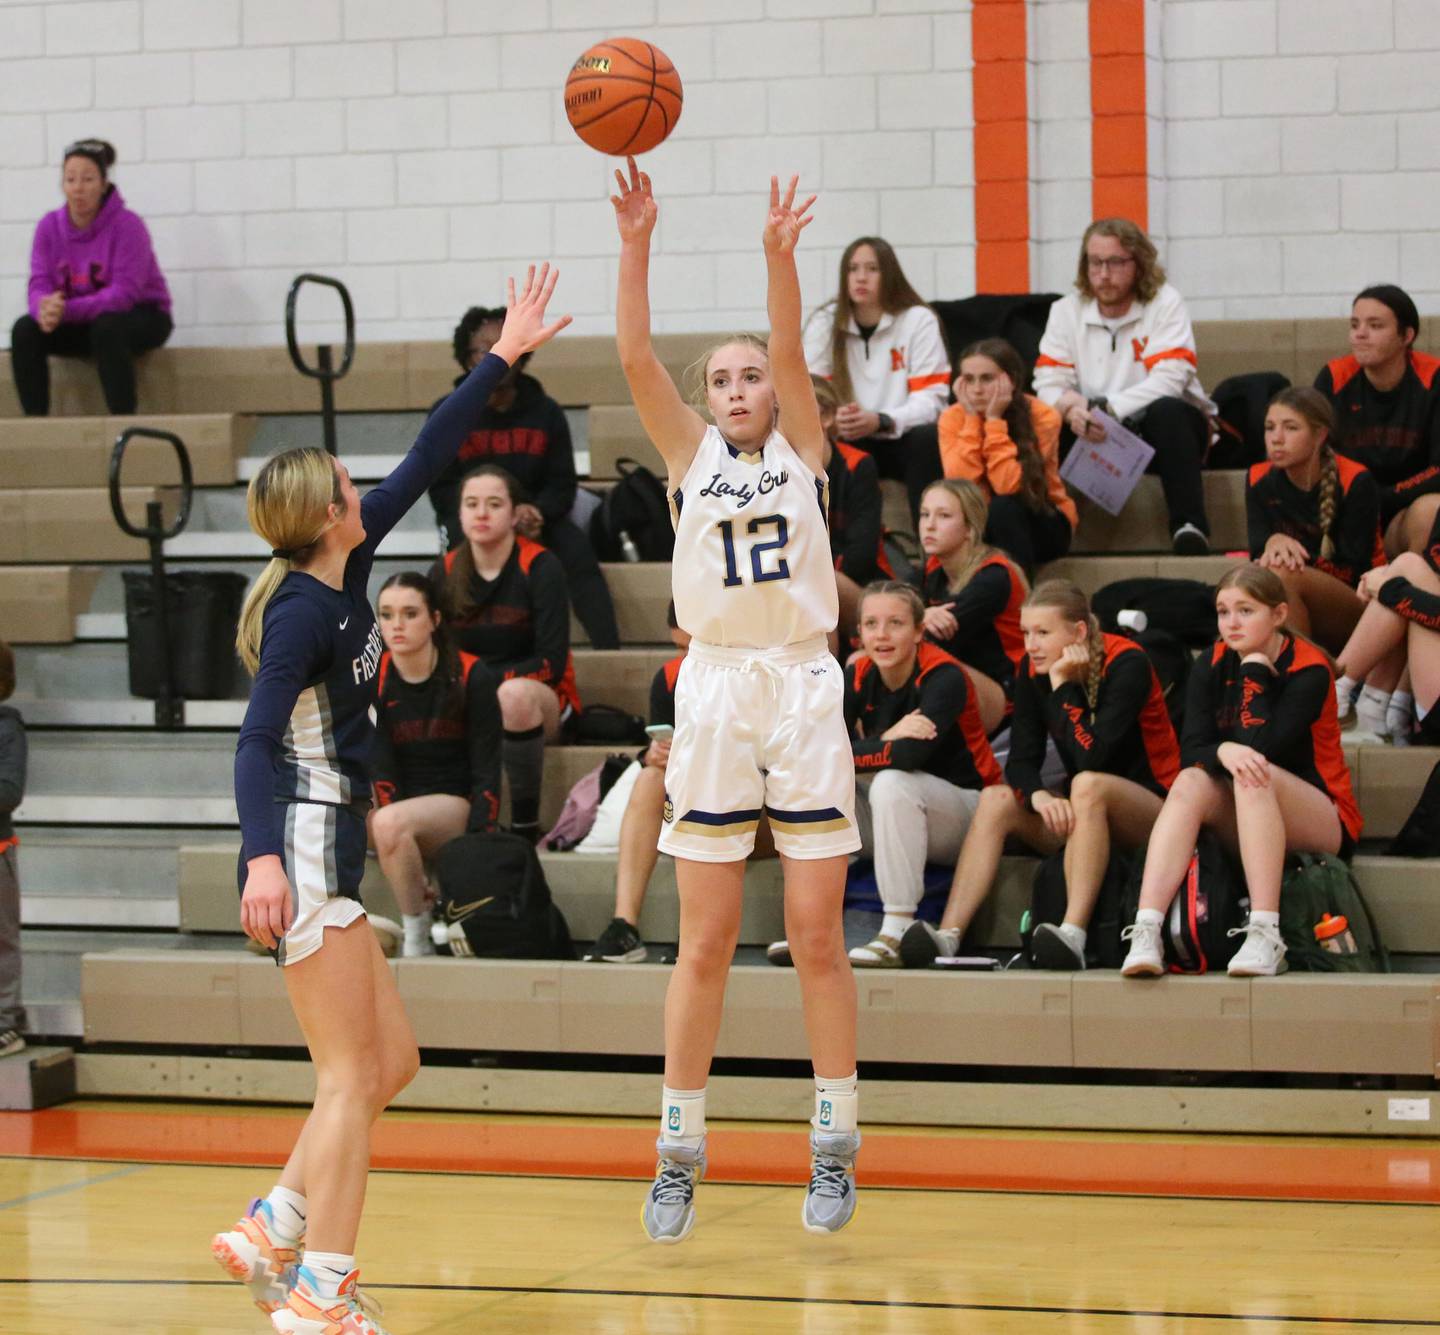 Marquette's Lilly Craig shoots a three point shot over Fieldcrest's Kaitlyn White during the Integrated Seed Lady falcon Basketball Classic tournament on Monday, Nov. 13, 2023 at Flanagan High School.